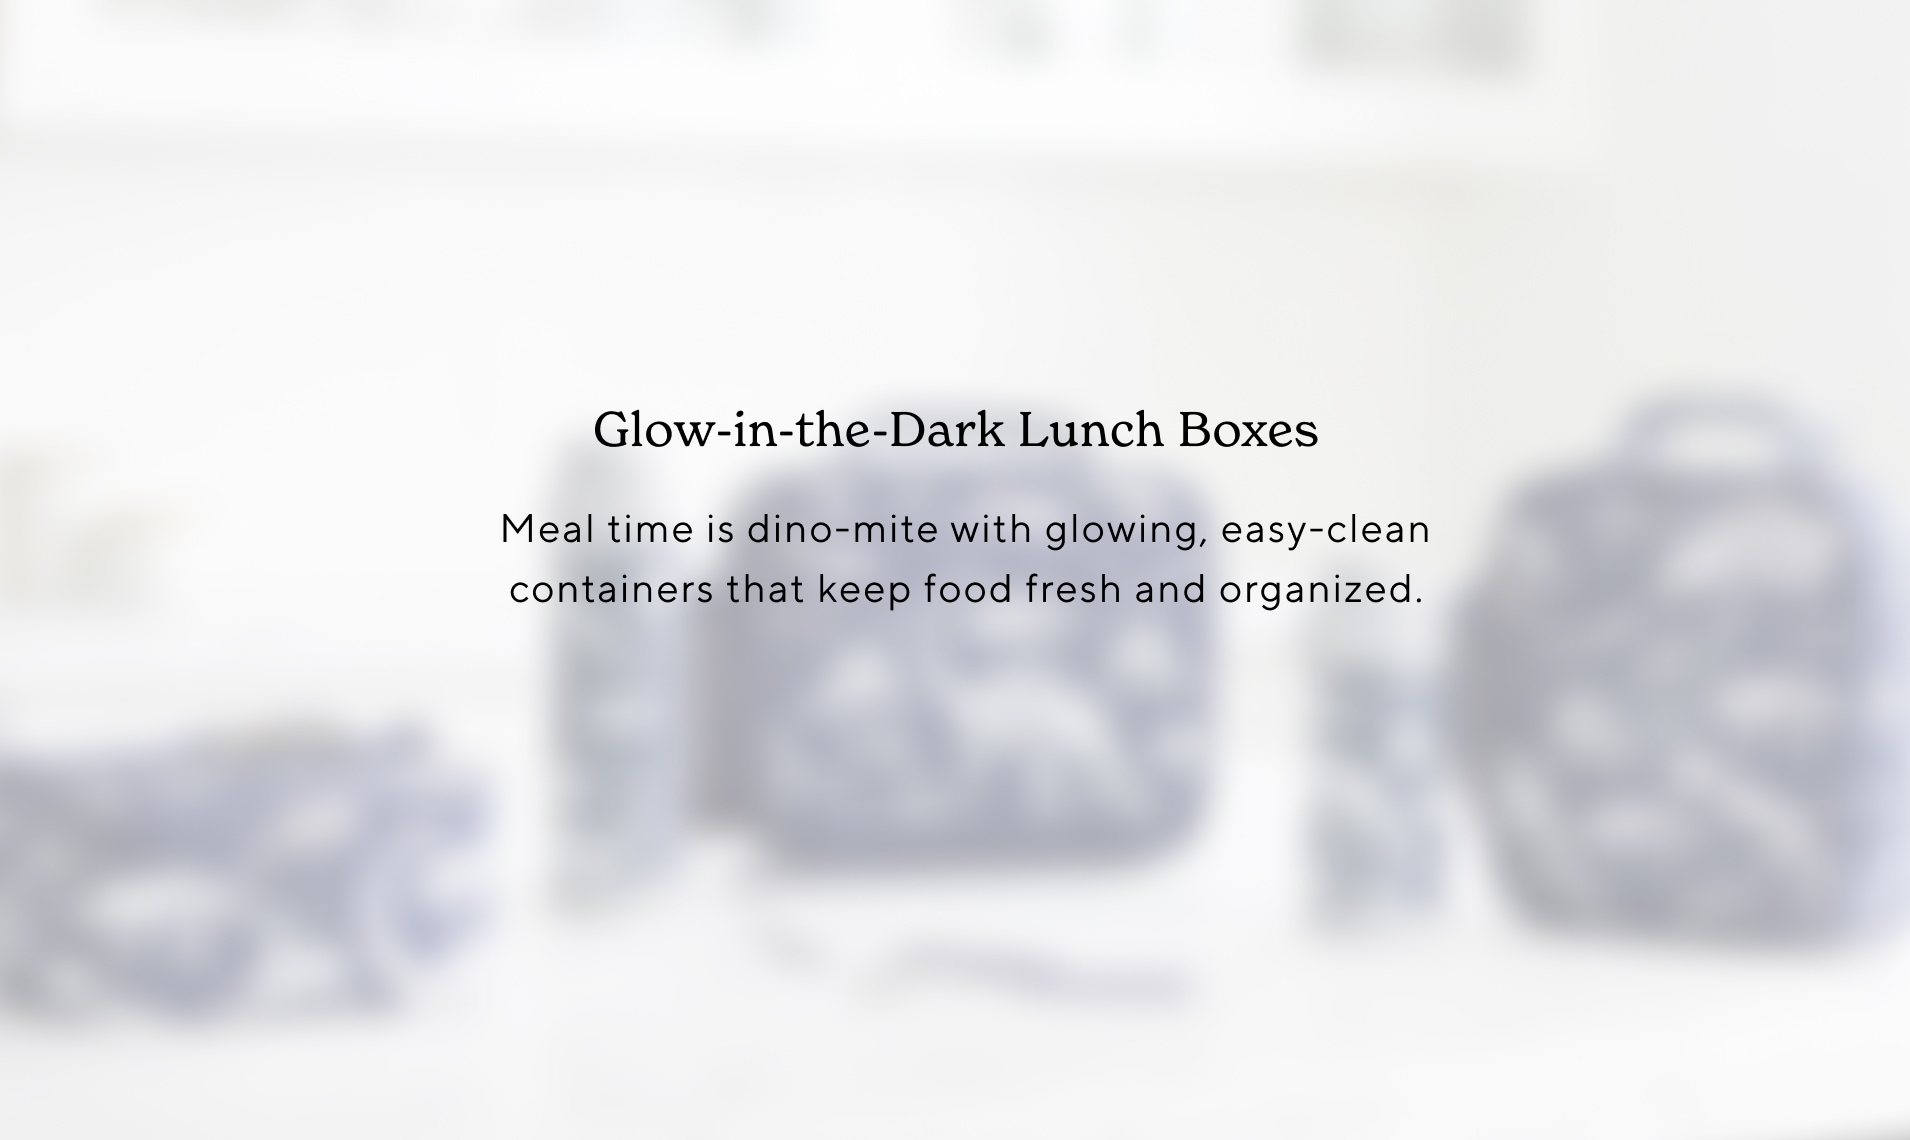 Glow-in-the-Dark Lunch Boxes